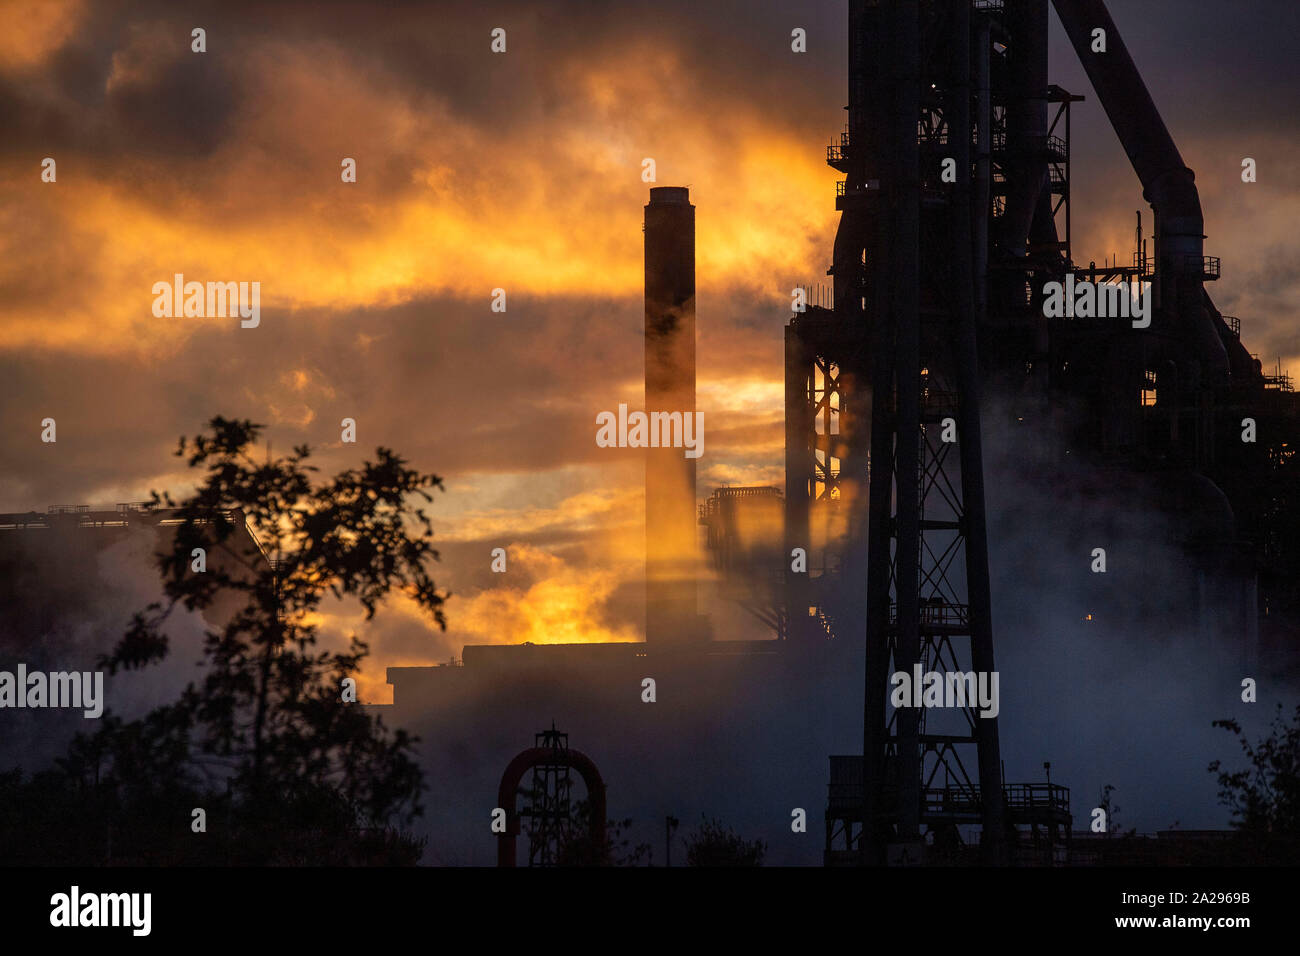 Port Talbot - UK - 1st October 2019 : The late evening sunshine bounces off the steam at the Tata Steelworks in Port Talbot this evening during a break in the wet weather. Credit: Phil Rees/Alamy Live News Stock Photo